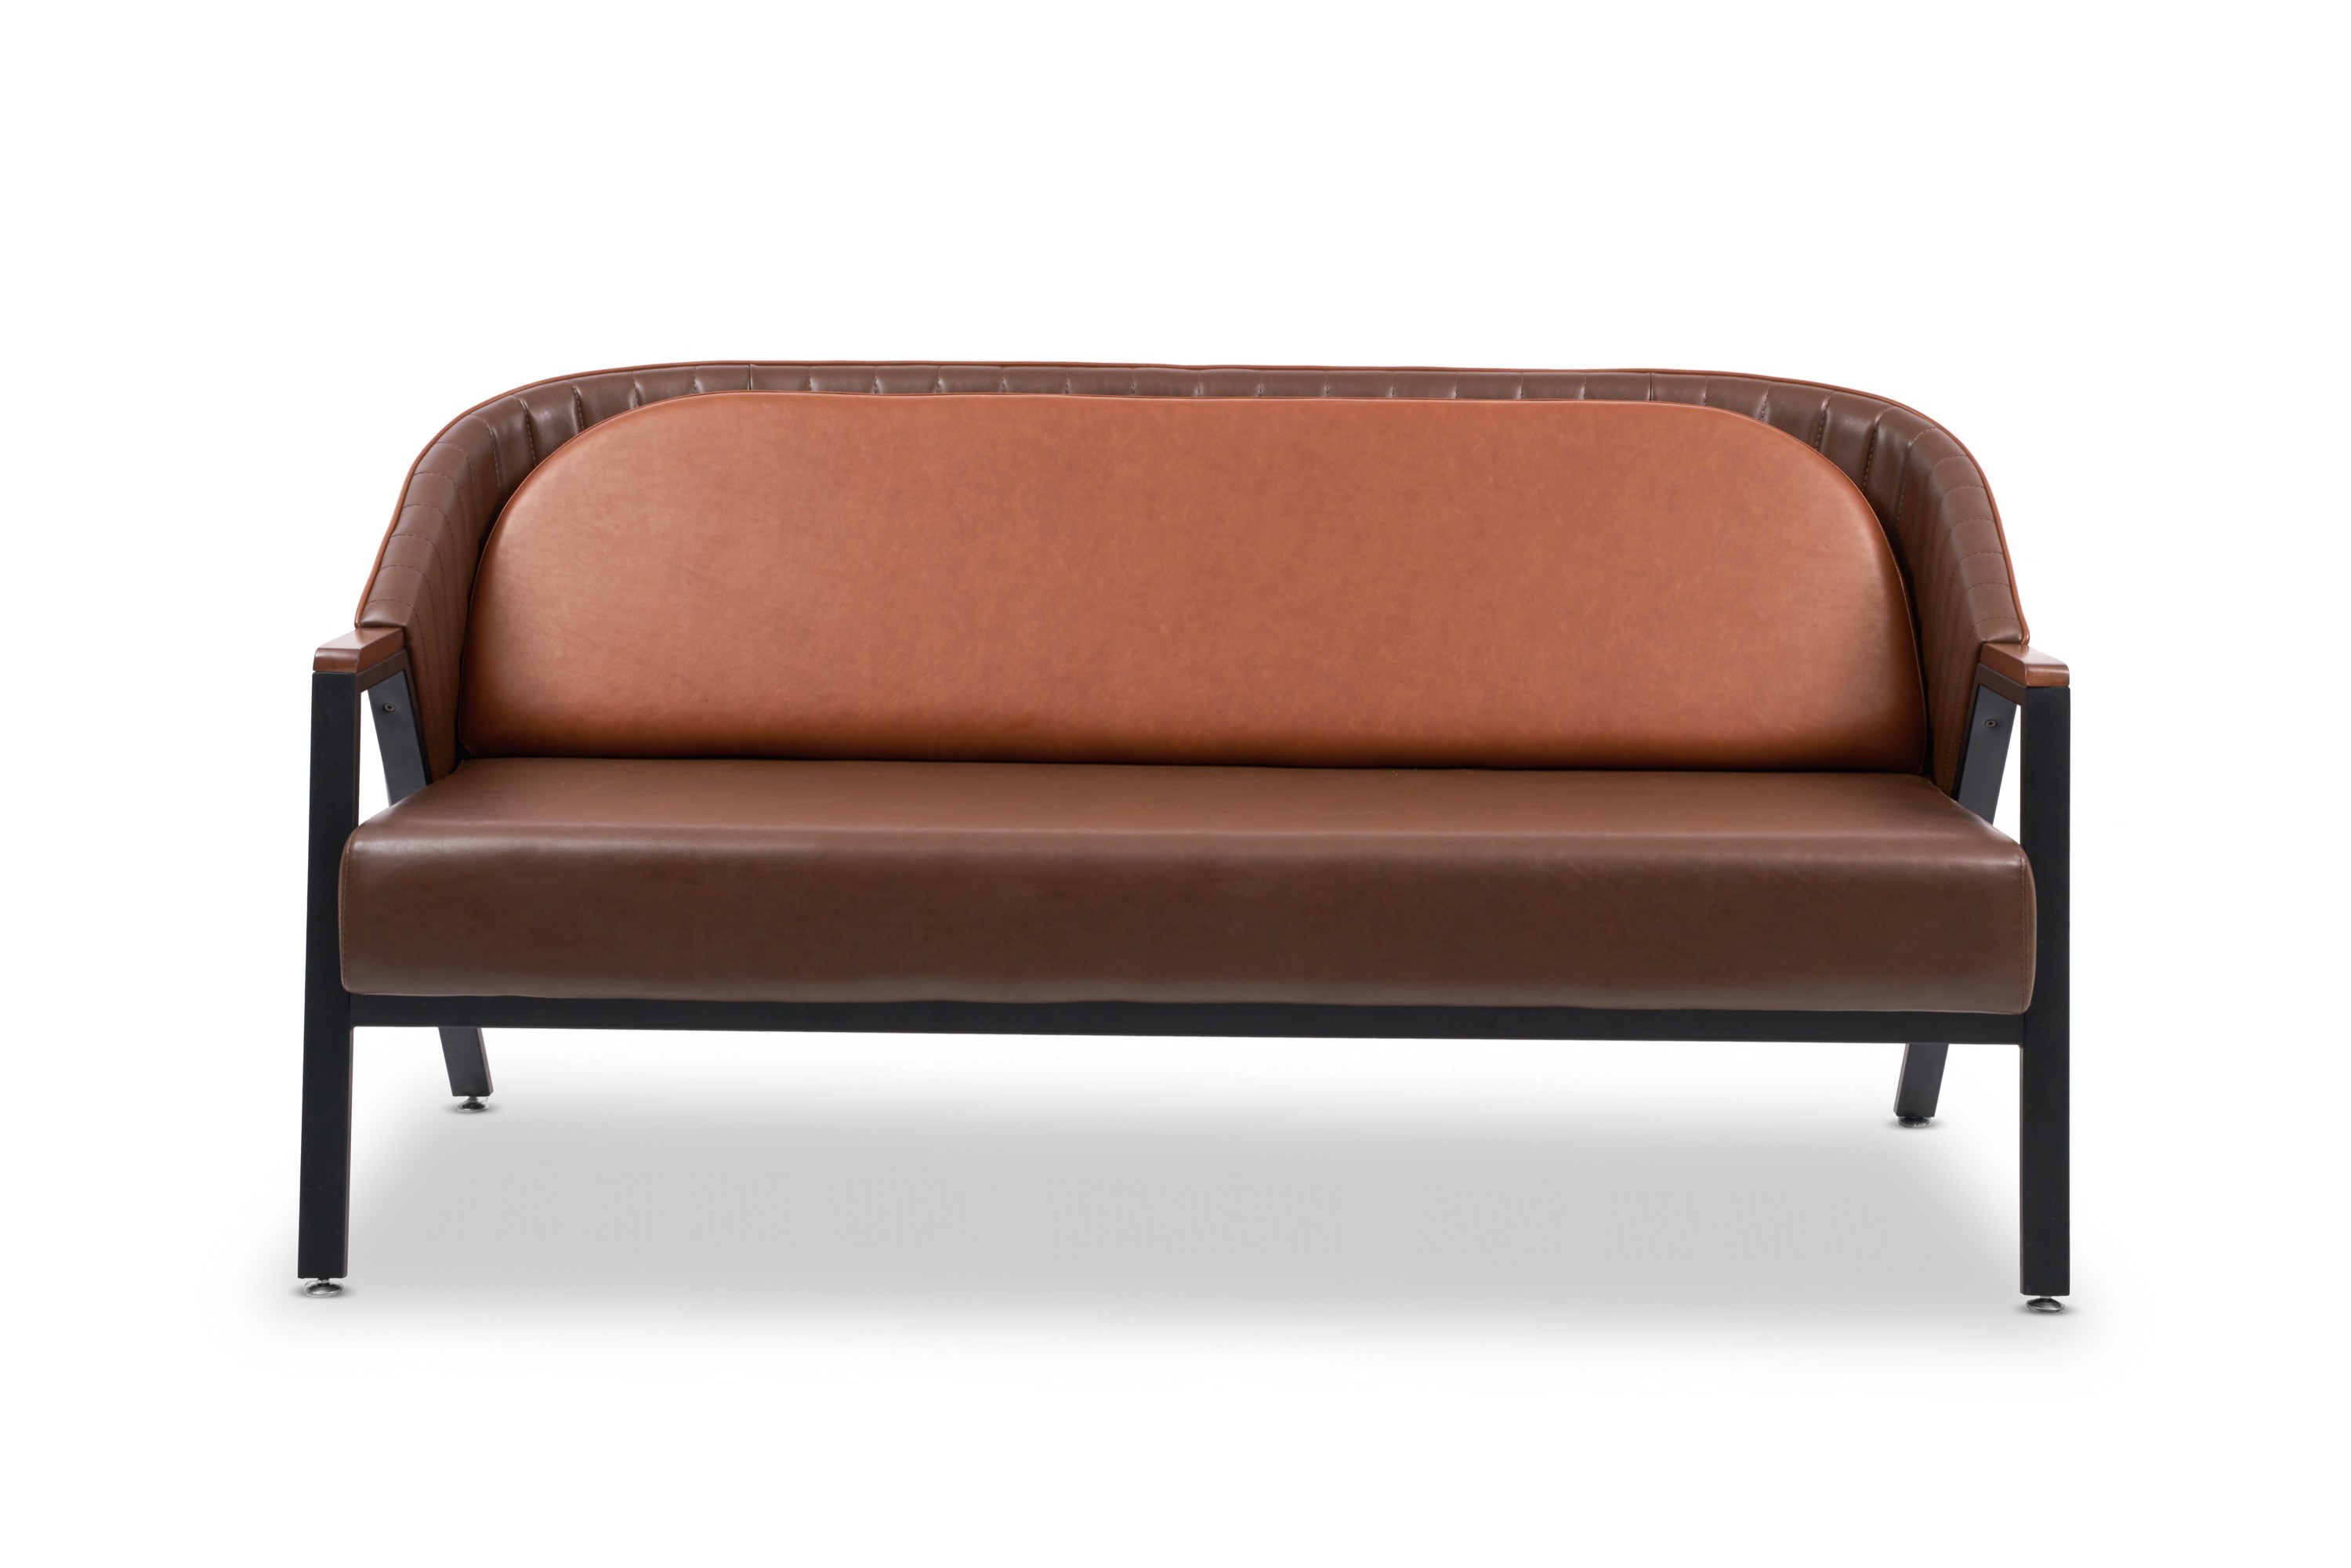 OYSTER DOUBLE SOFA